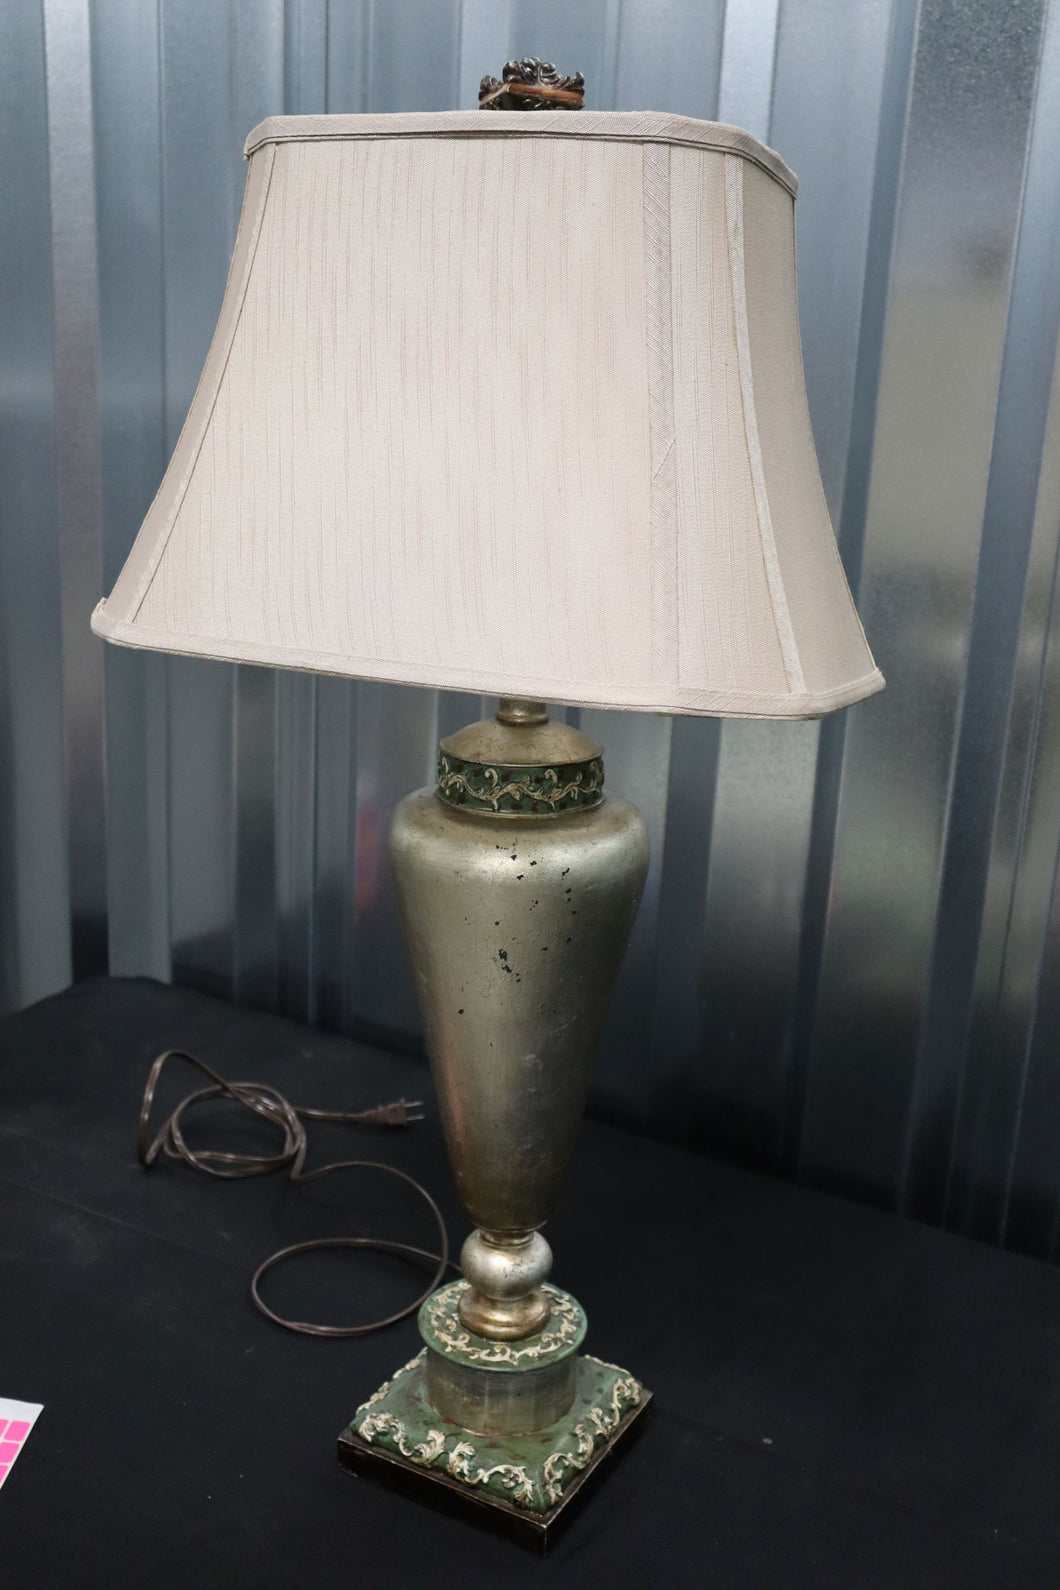 Silver Lamp with Green and Beige Accents